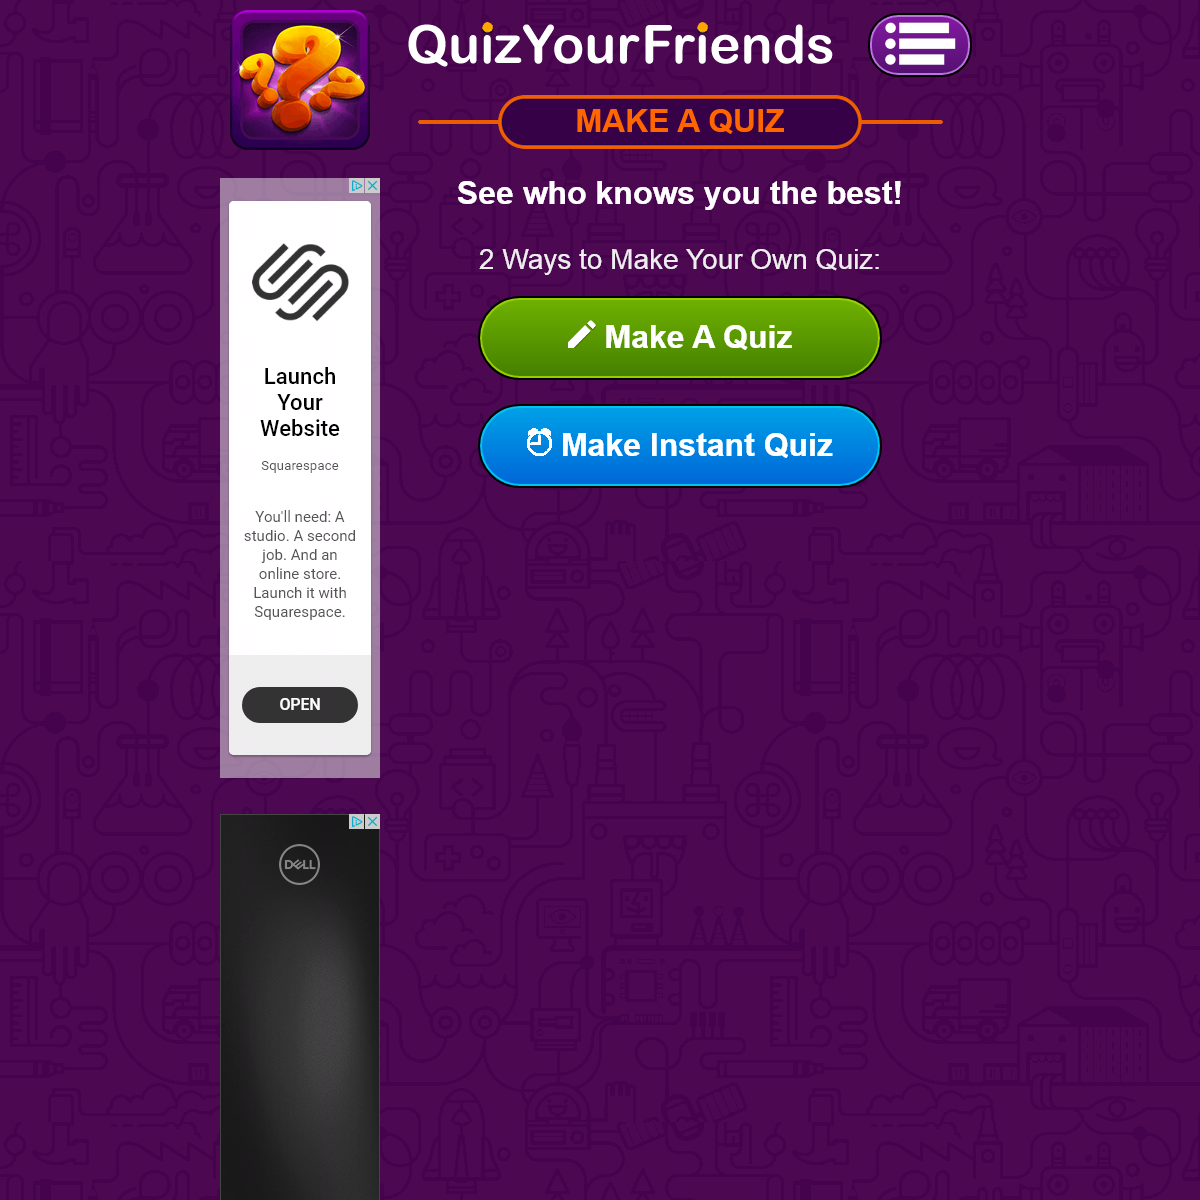 A complete backup of quizyourfriends.com